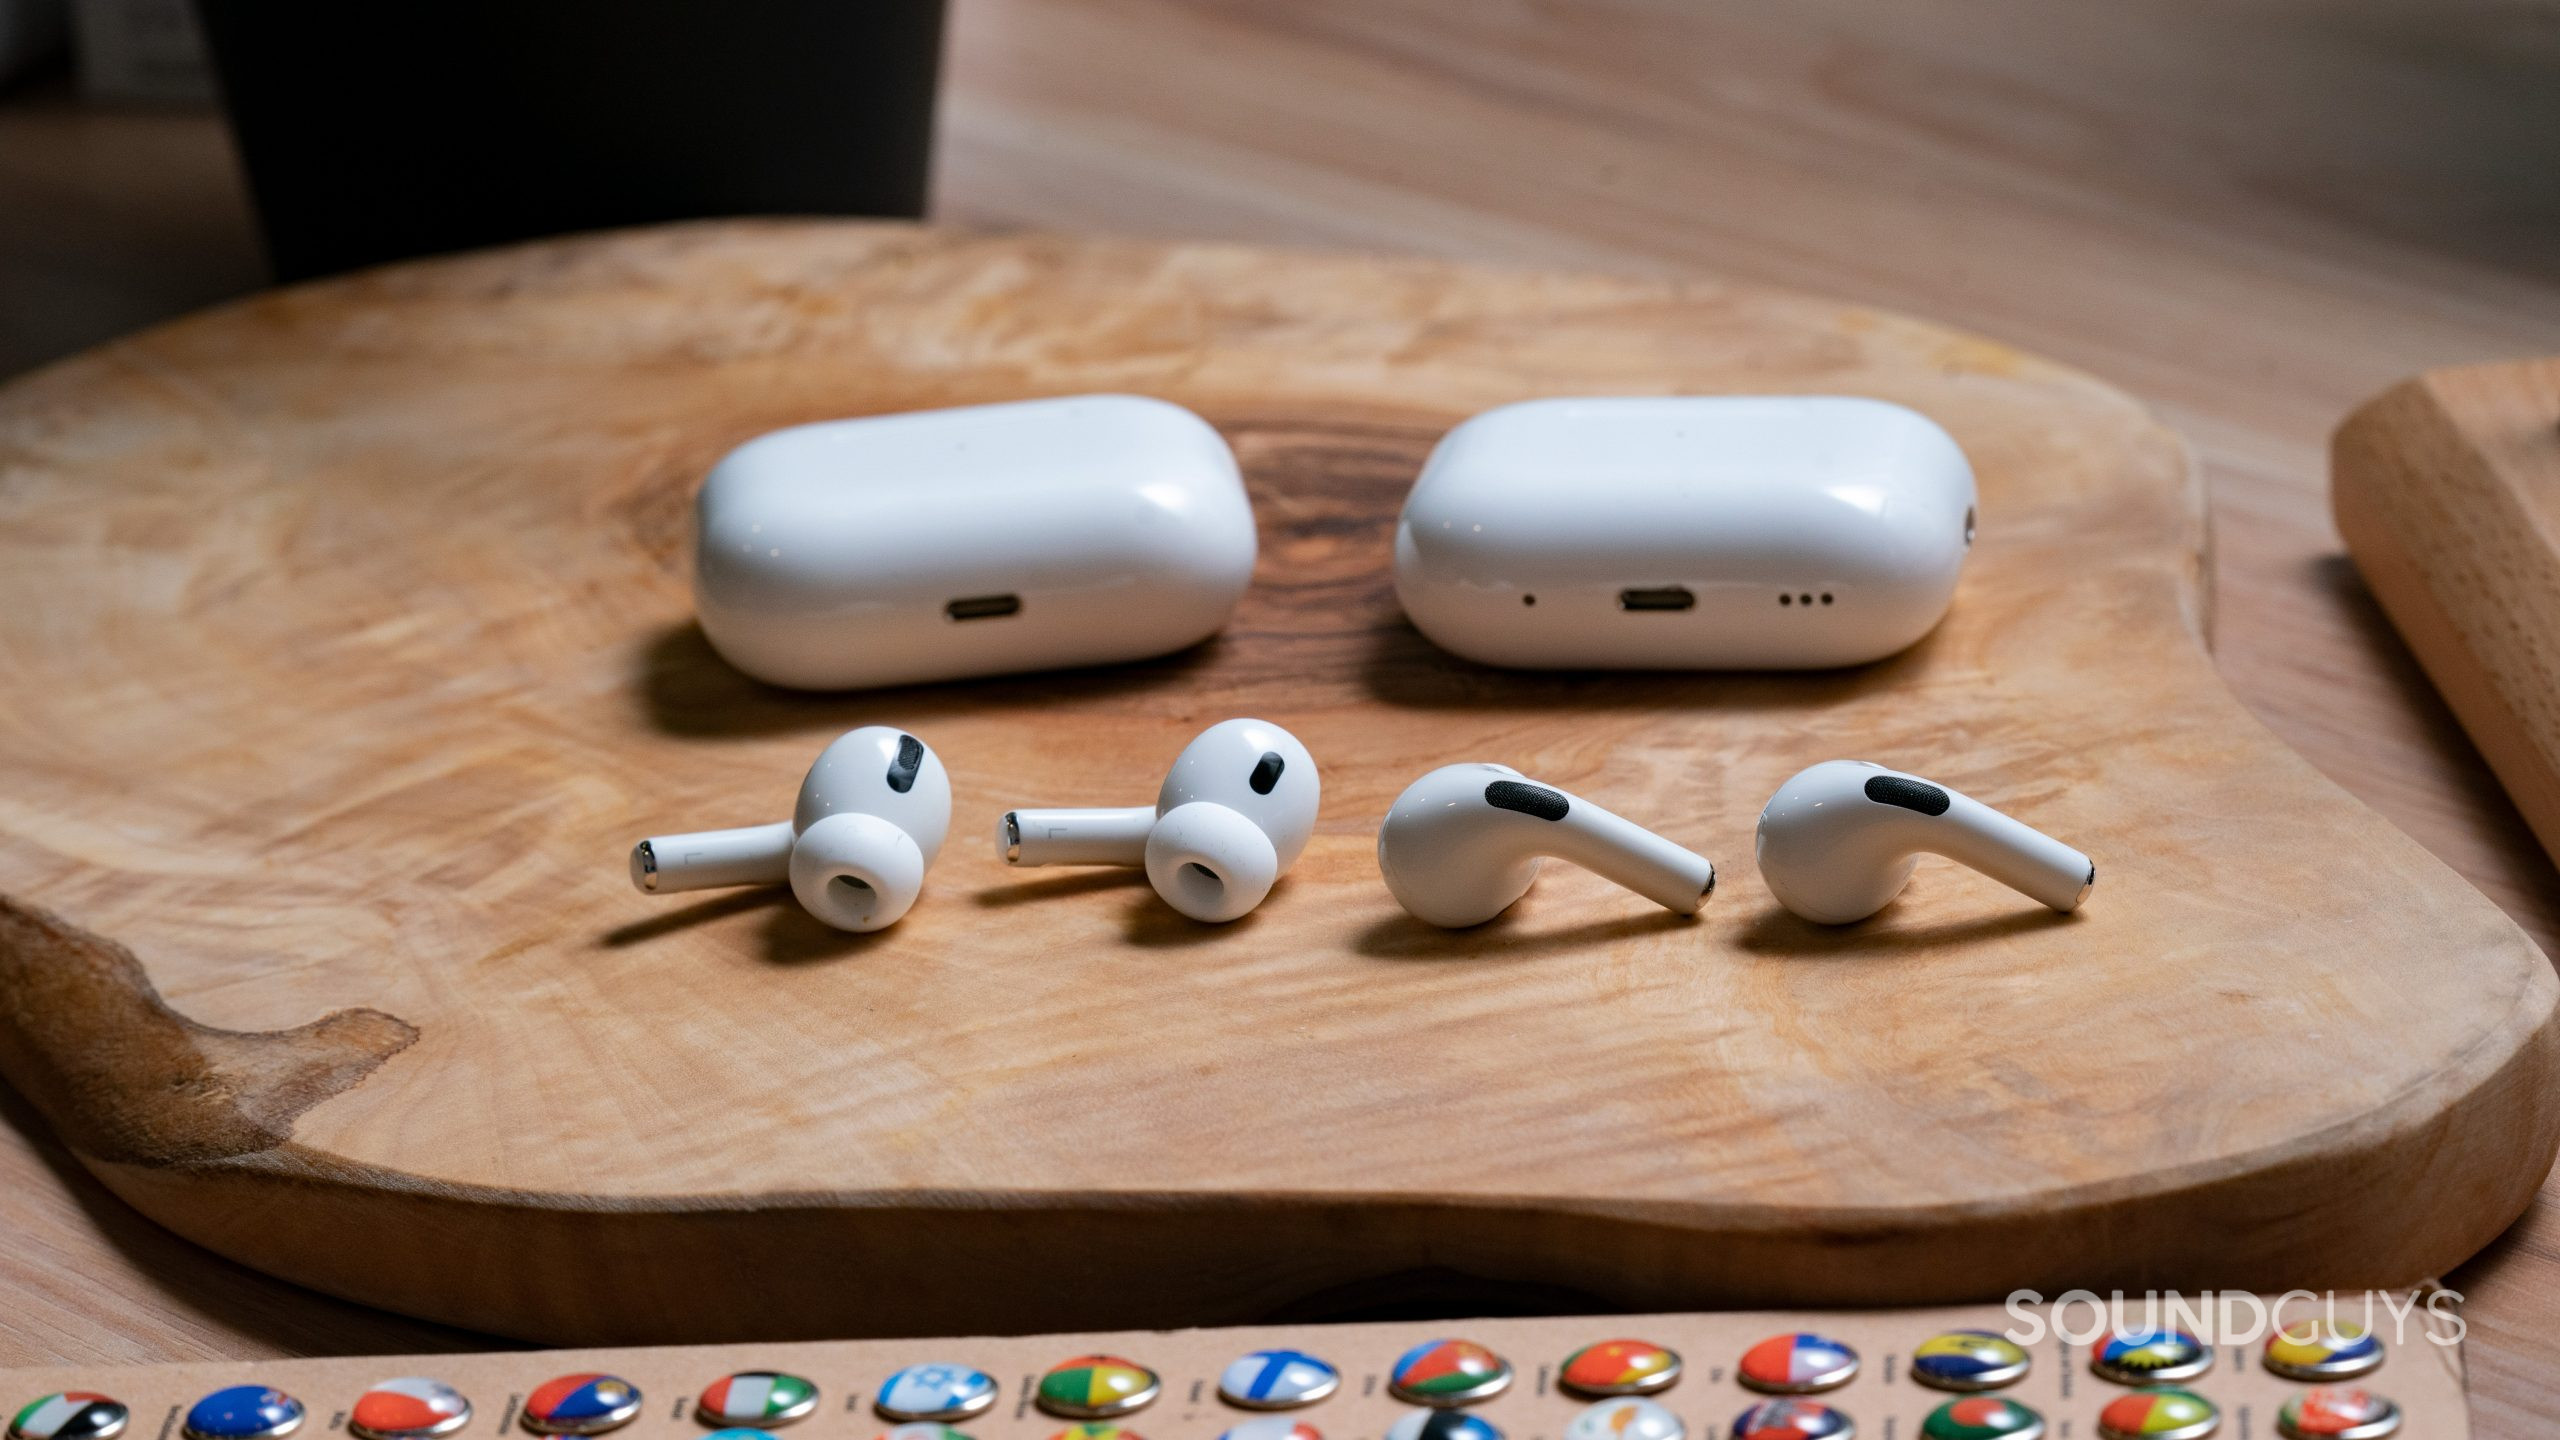 Apple AirPods Pro (2nd generation) vs Apple AirPods Pro (1st